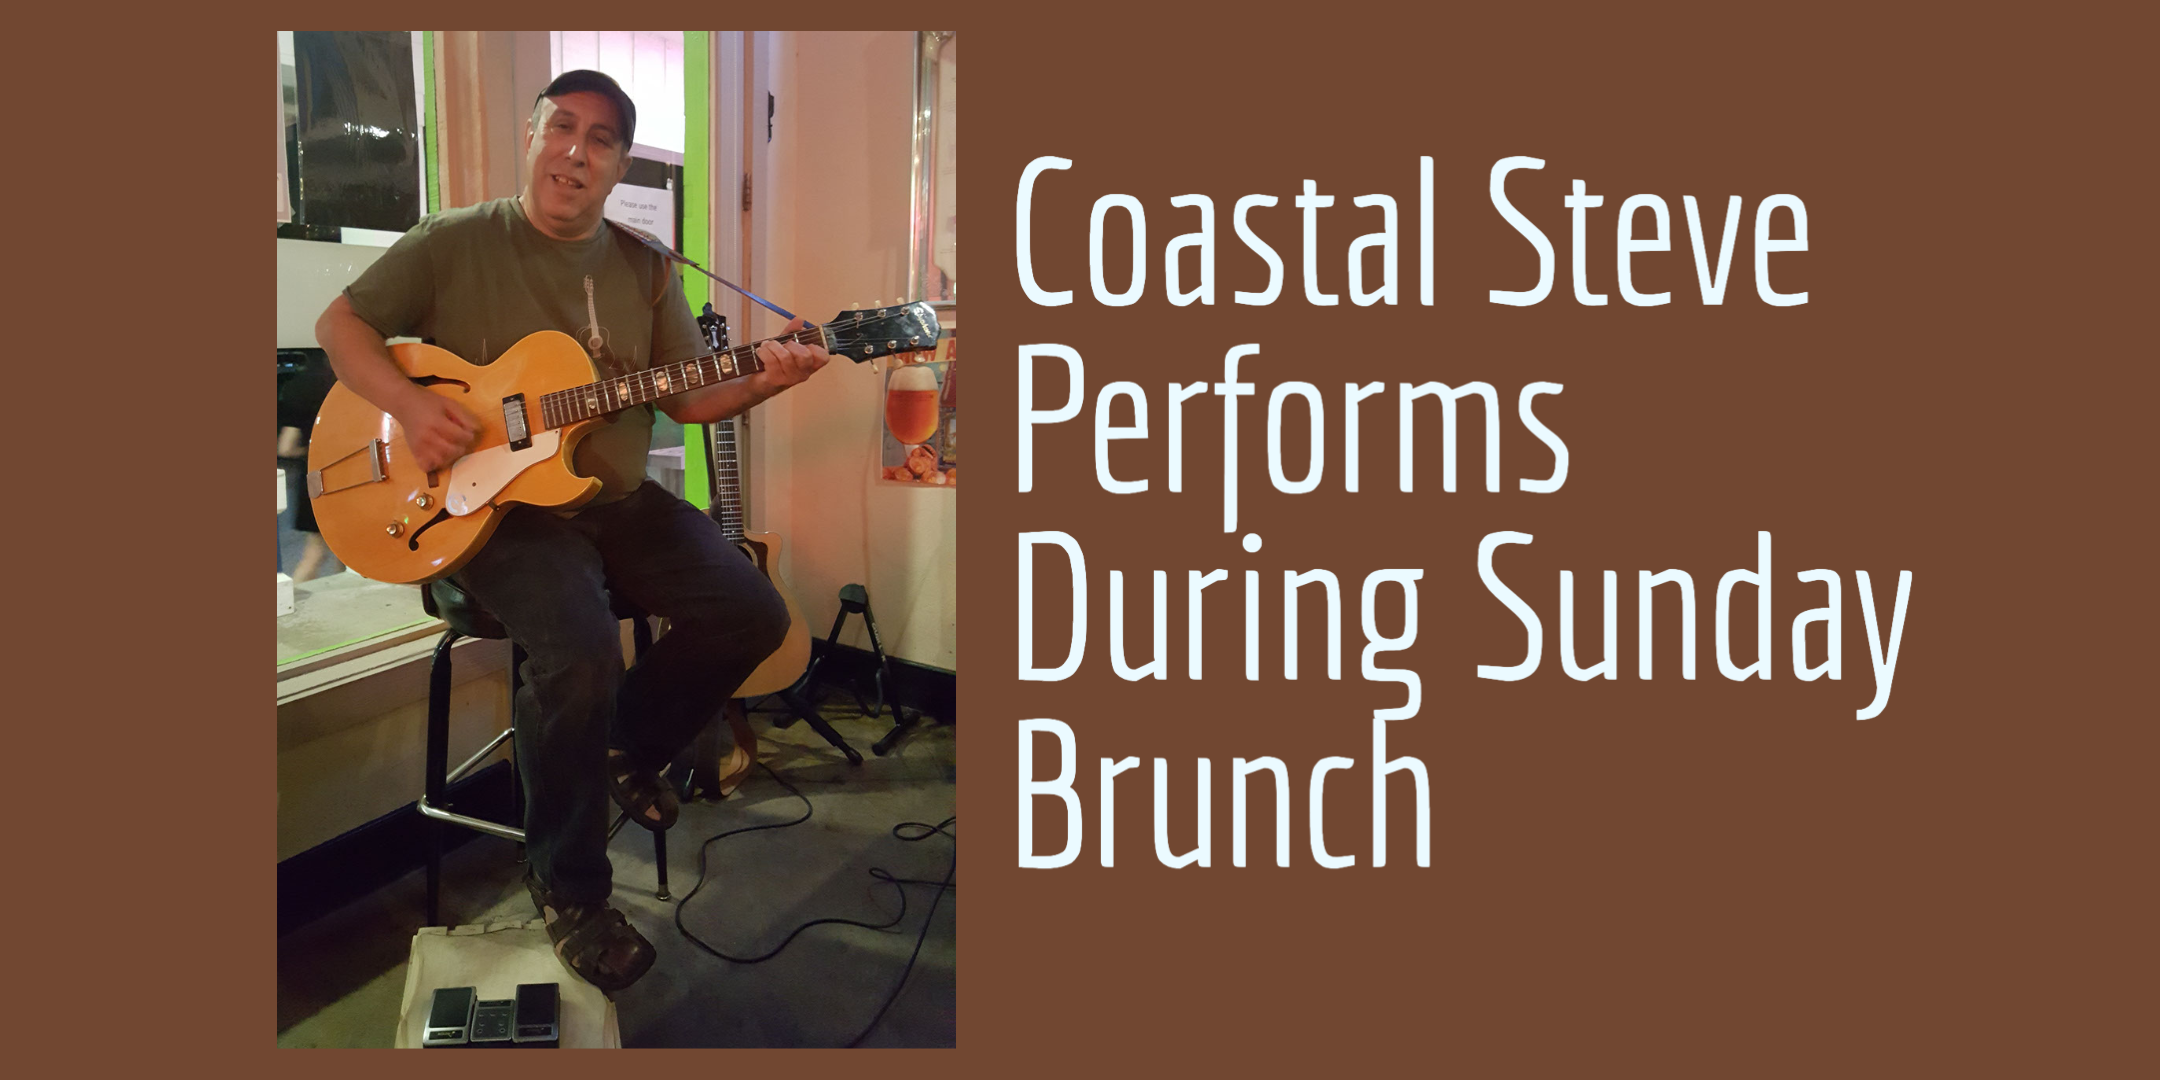 Coastal Steve Bramow performs acoustic sounds during Sunday Brunch at The Reserve Retreat